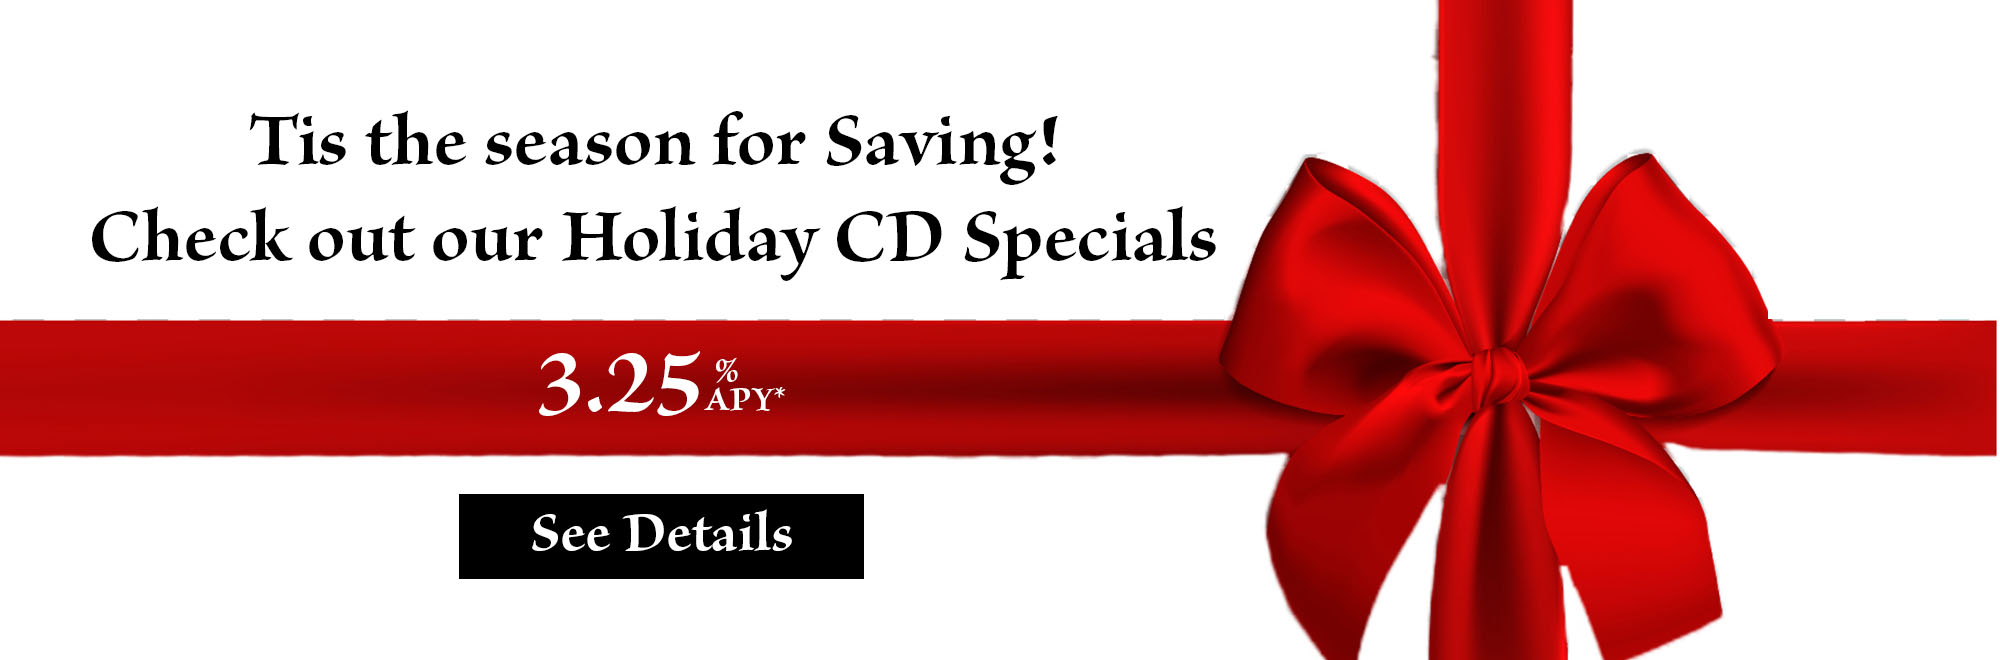 Tis the season for Saving! Check out our Holiday CD Specials 3.25% APY. See details